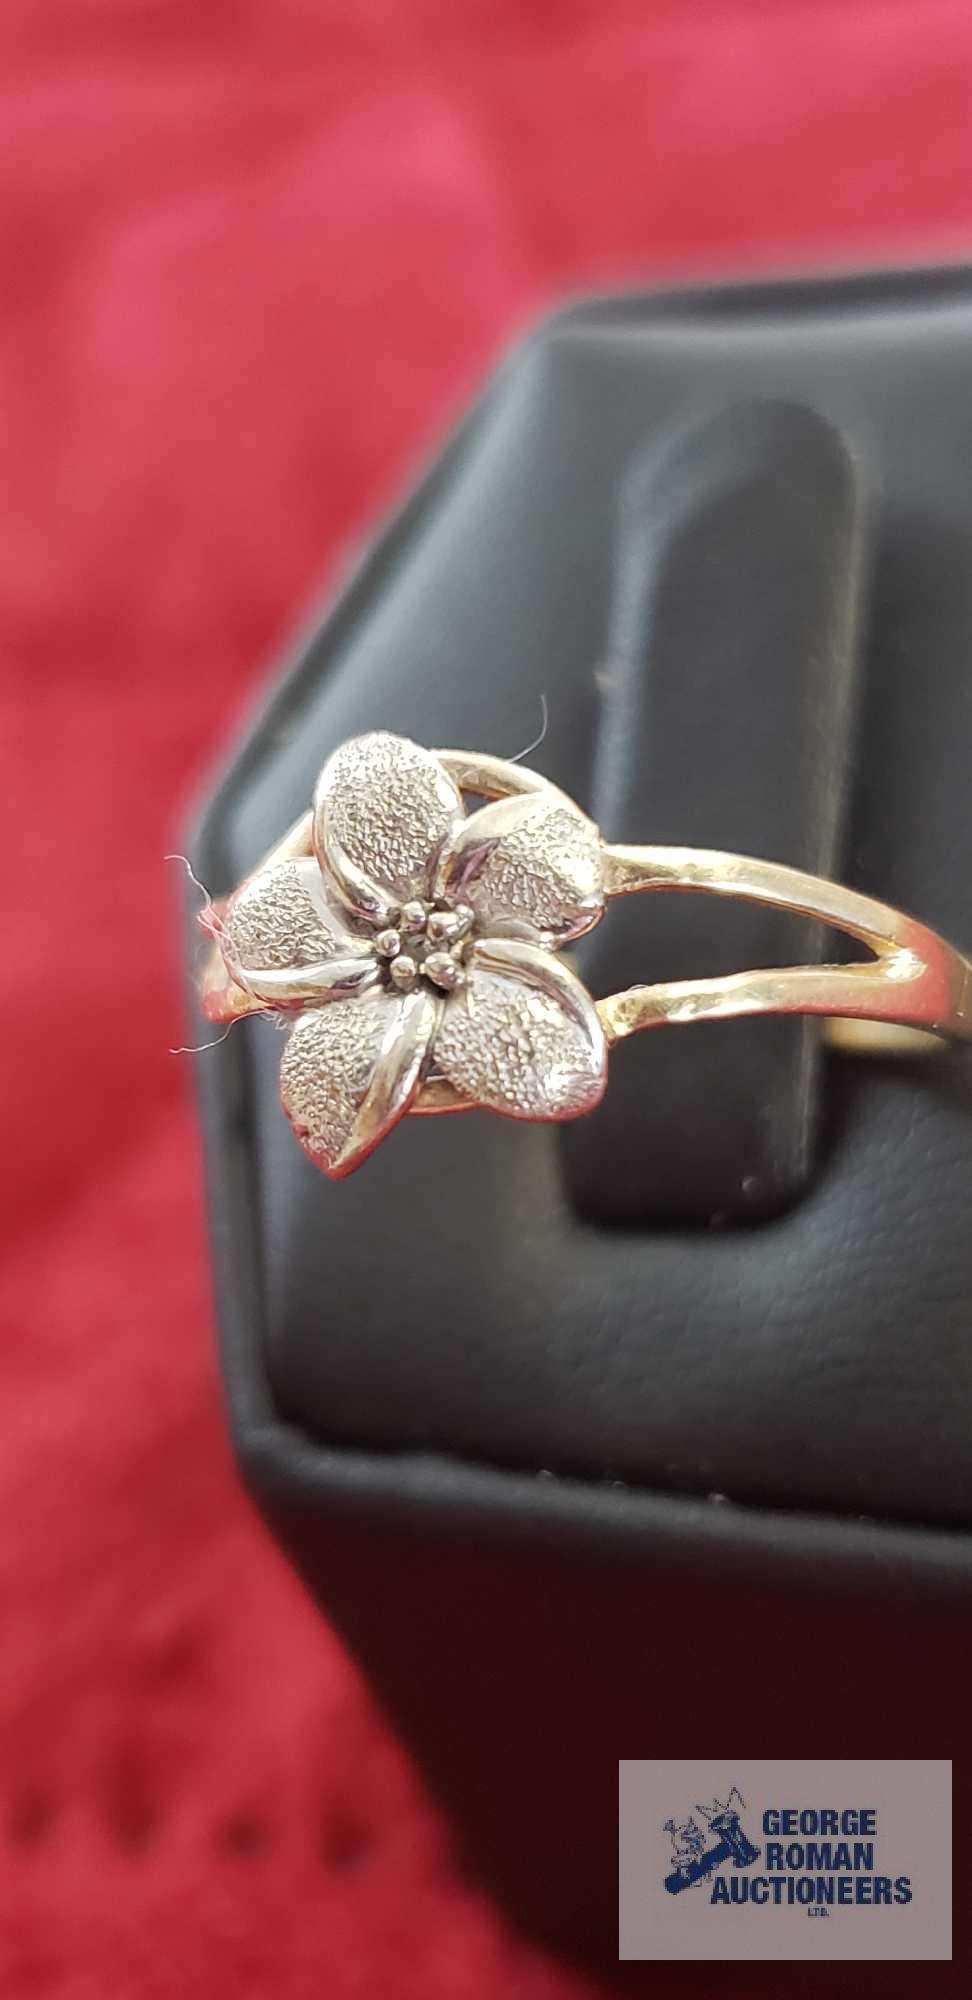 Two tone floral ring with clear gemstone chip, approximate total weight 1.41 G